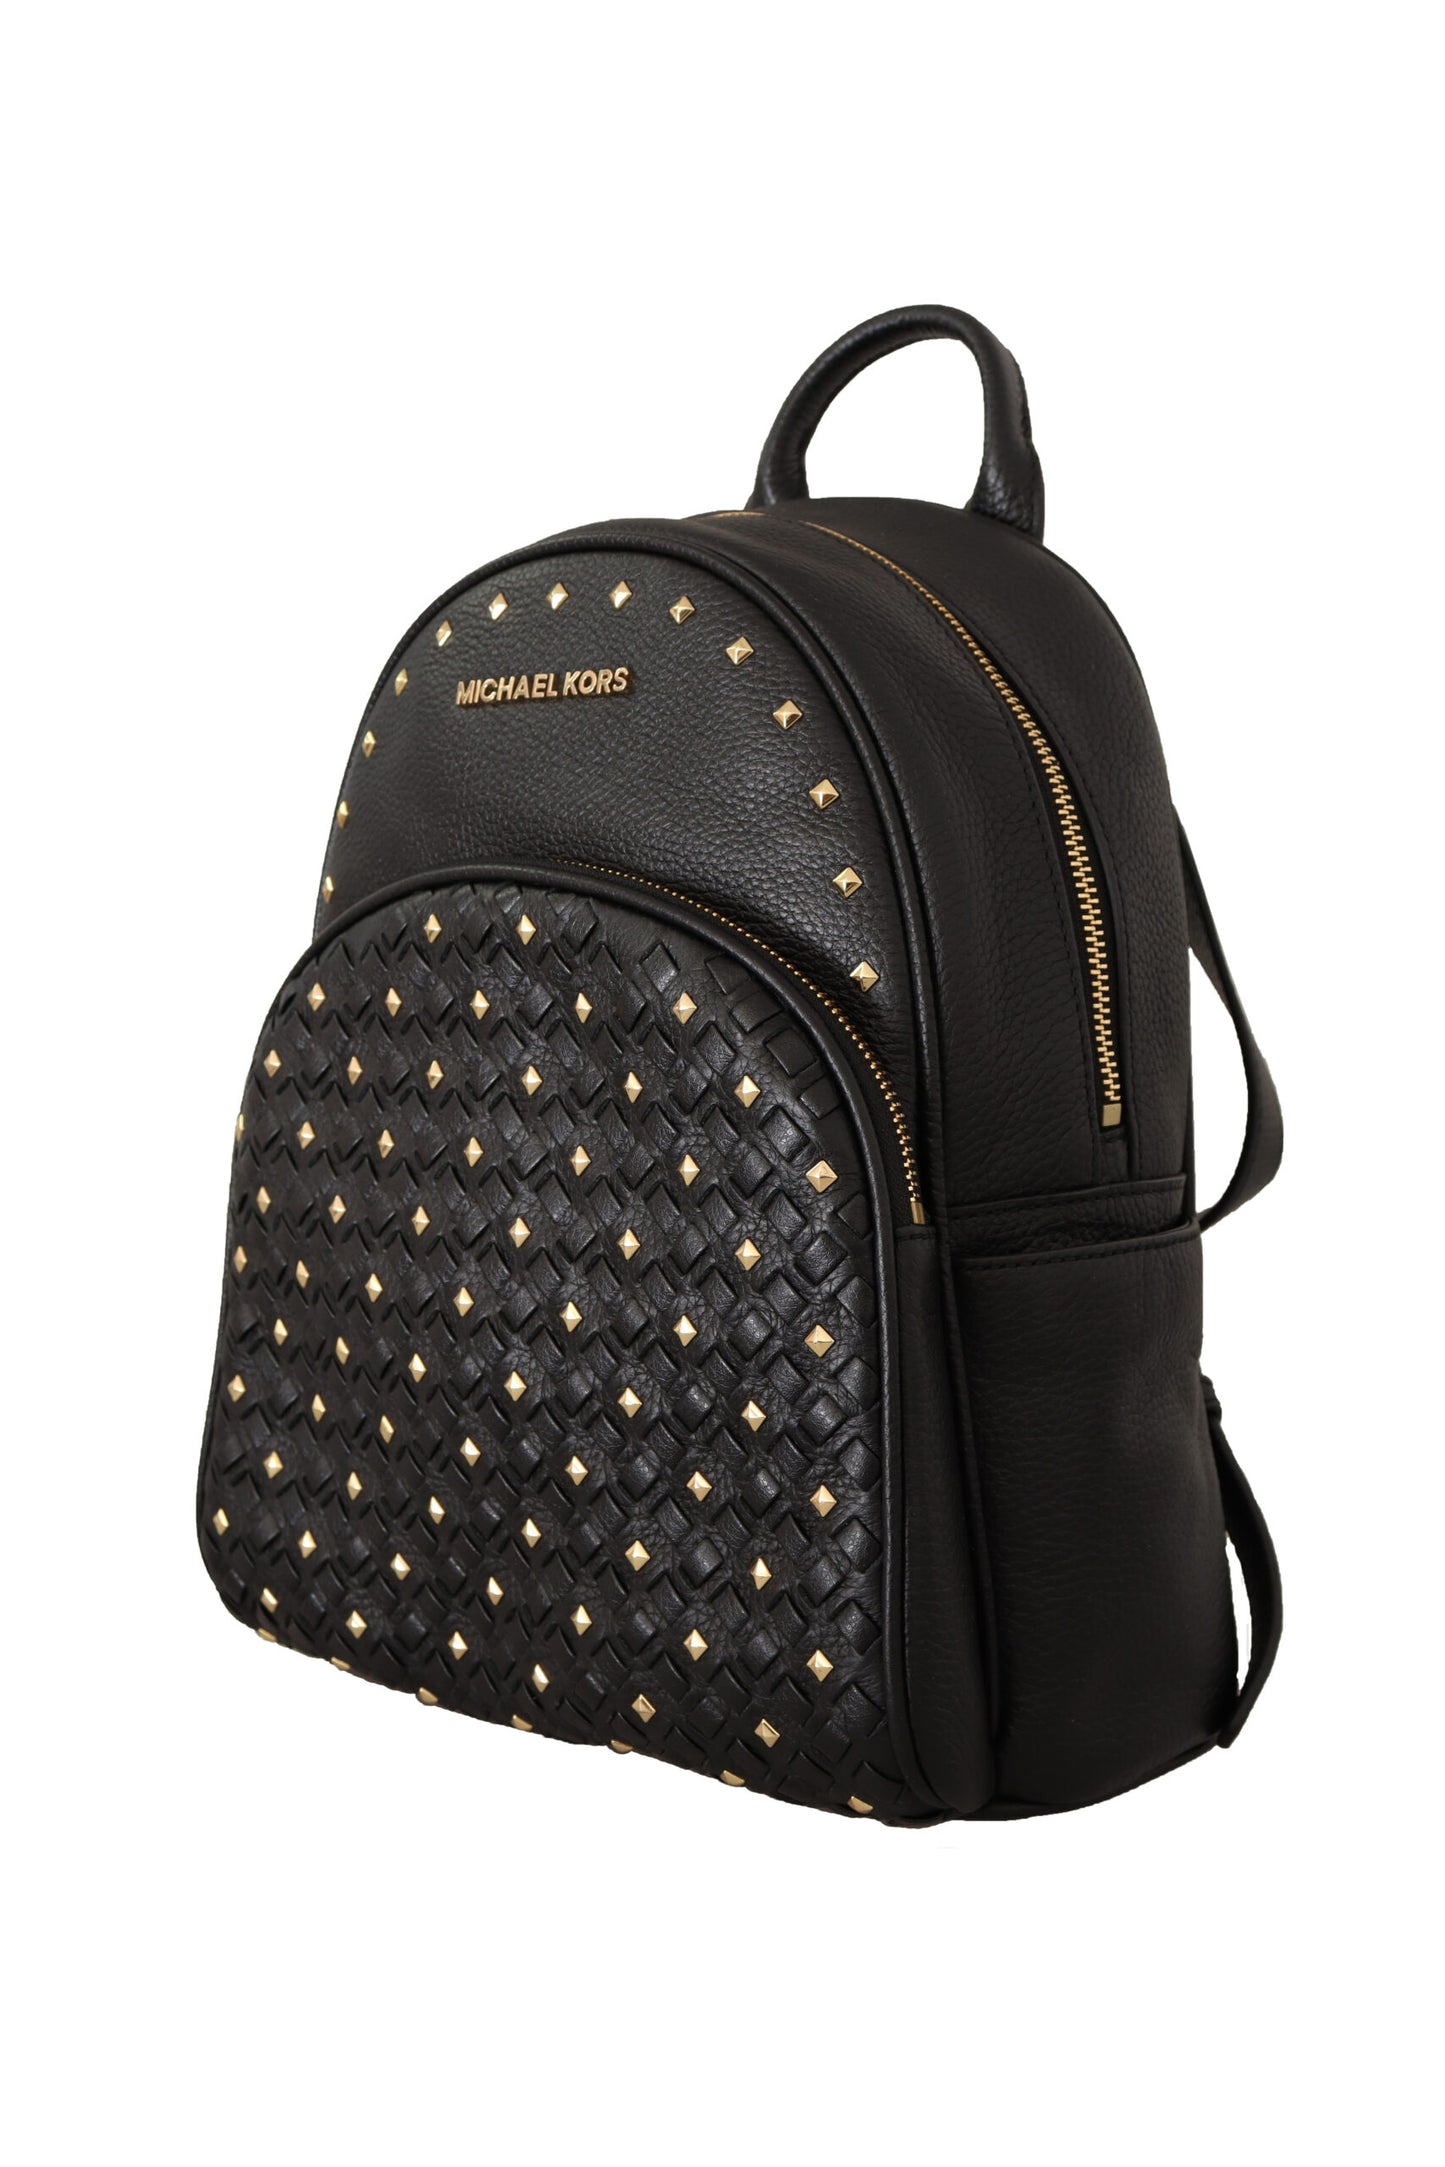 Chic Black Leather Backpack with Gold Accents